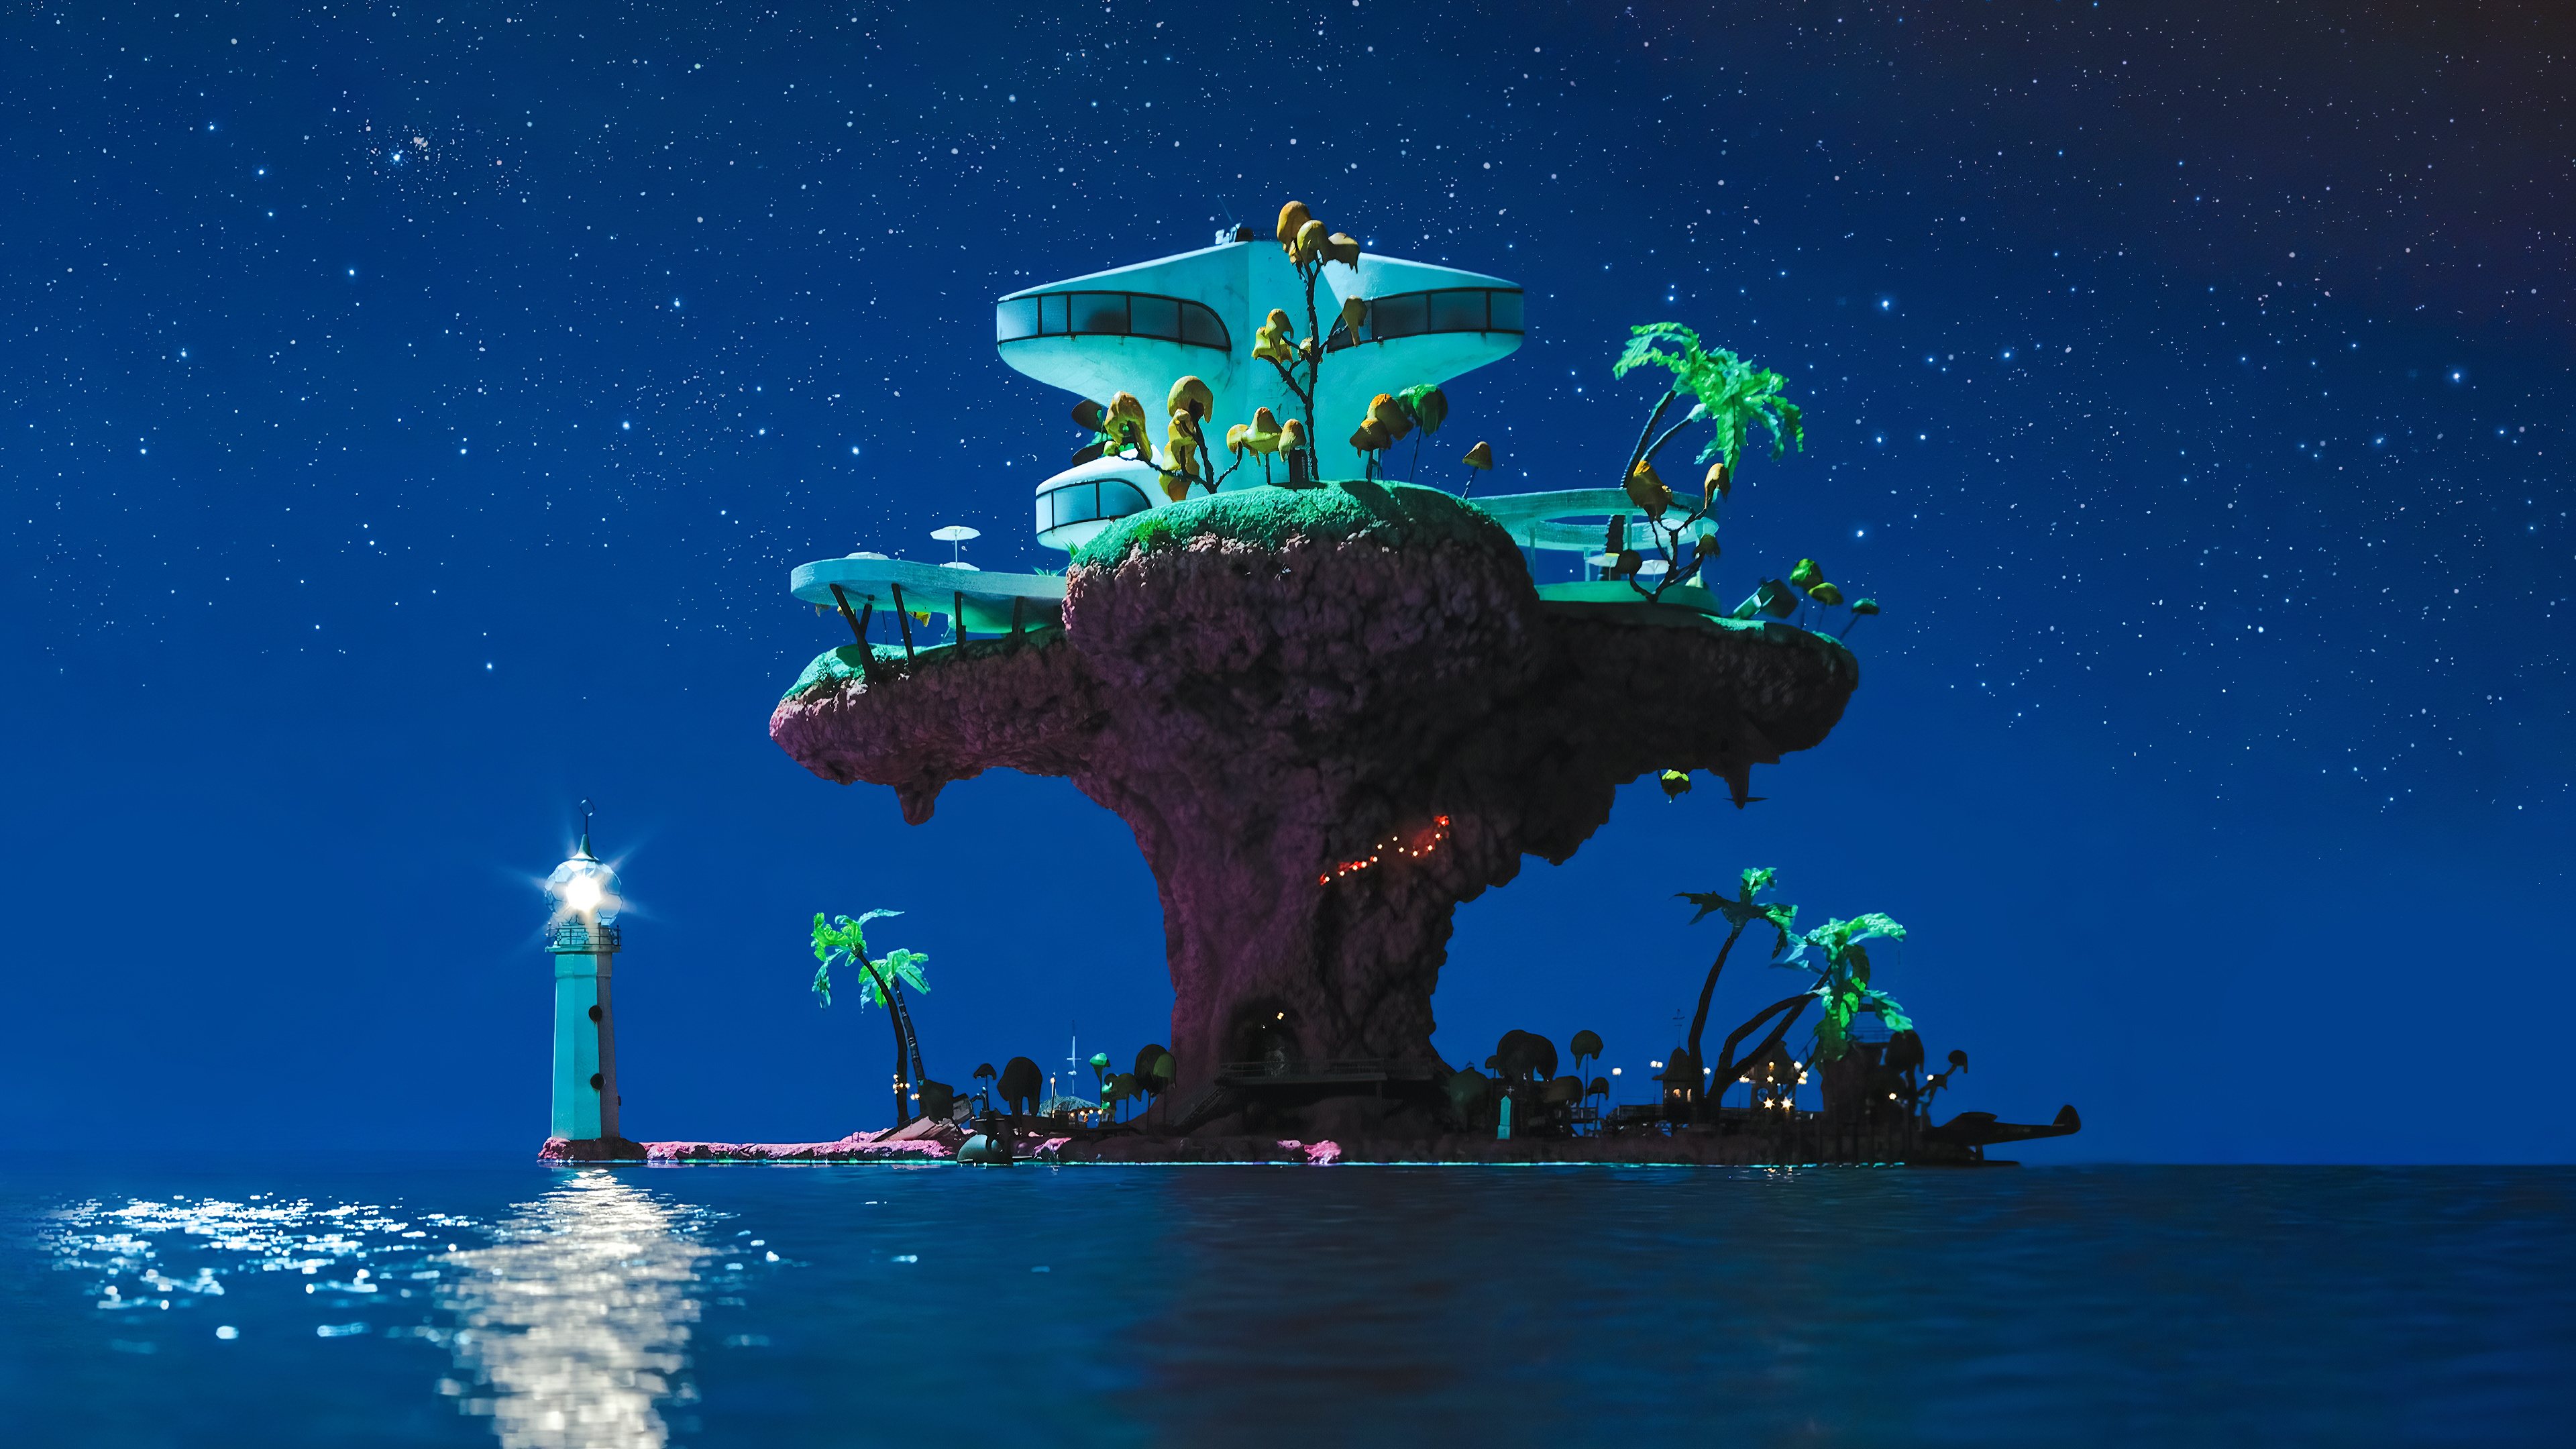 Gorillaz: Plastic Beach, The group's third studio album, A wide eclectic mix of new and established talent. 3840x2160 4K Wallpaper.